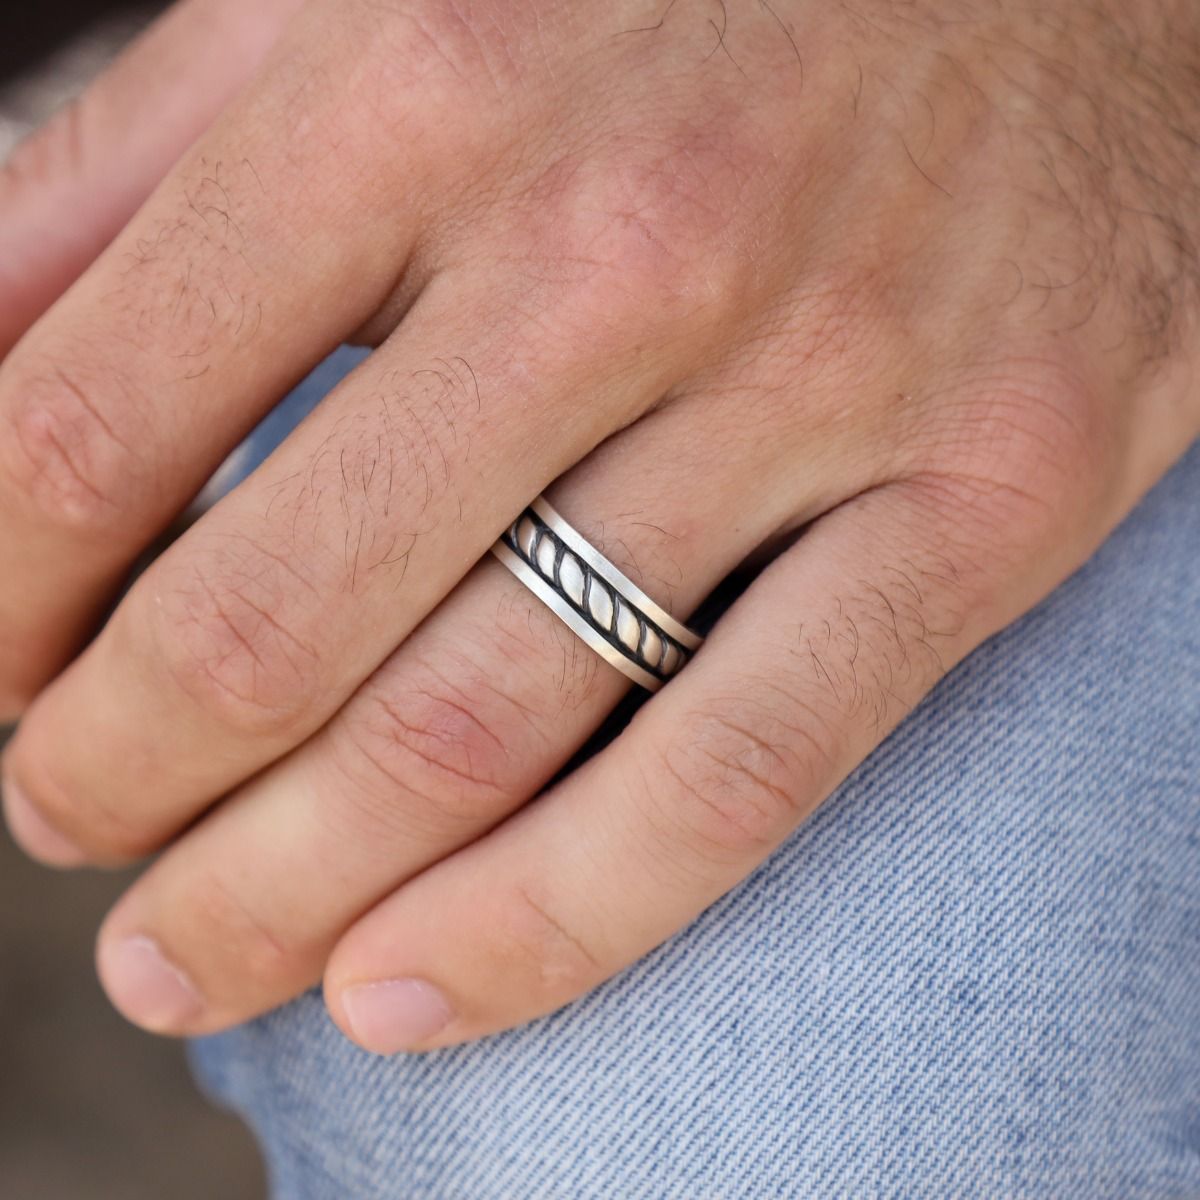 ThawrCave Black And Silver Rings For Mens Simple Design And, 40% OFF